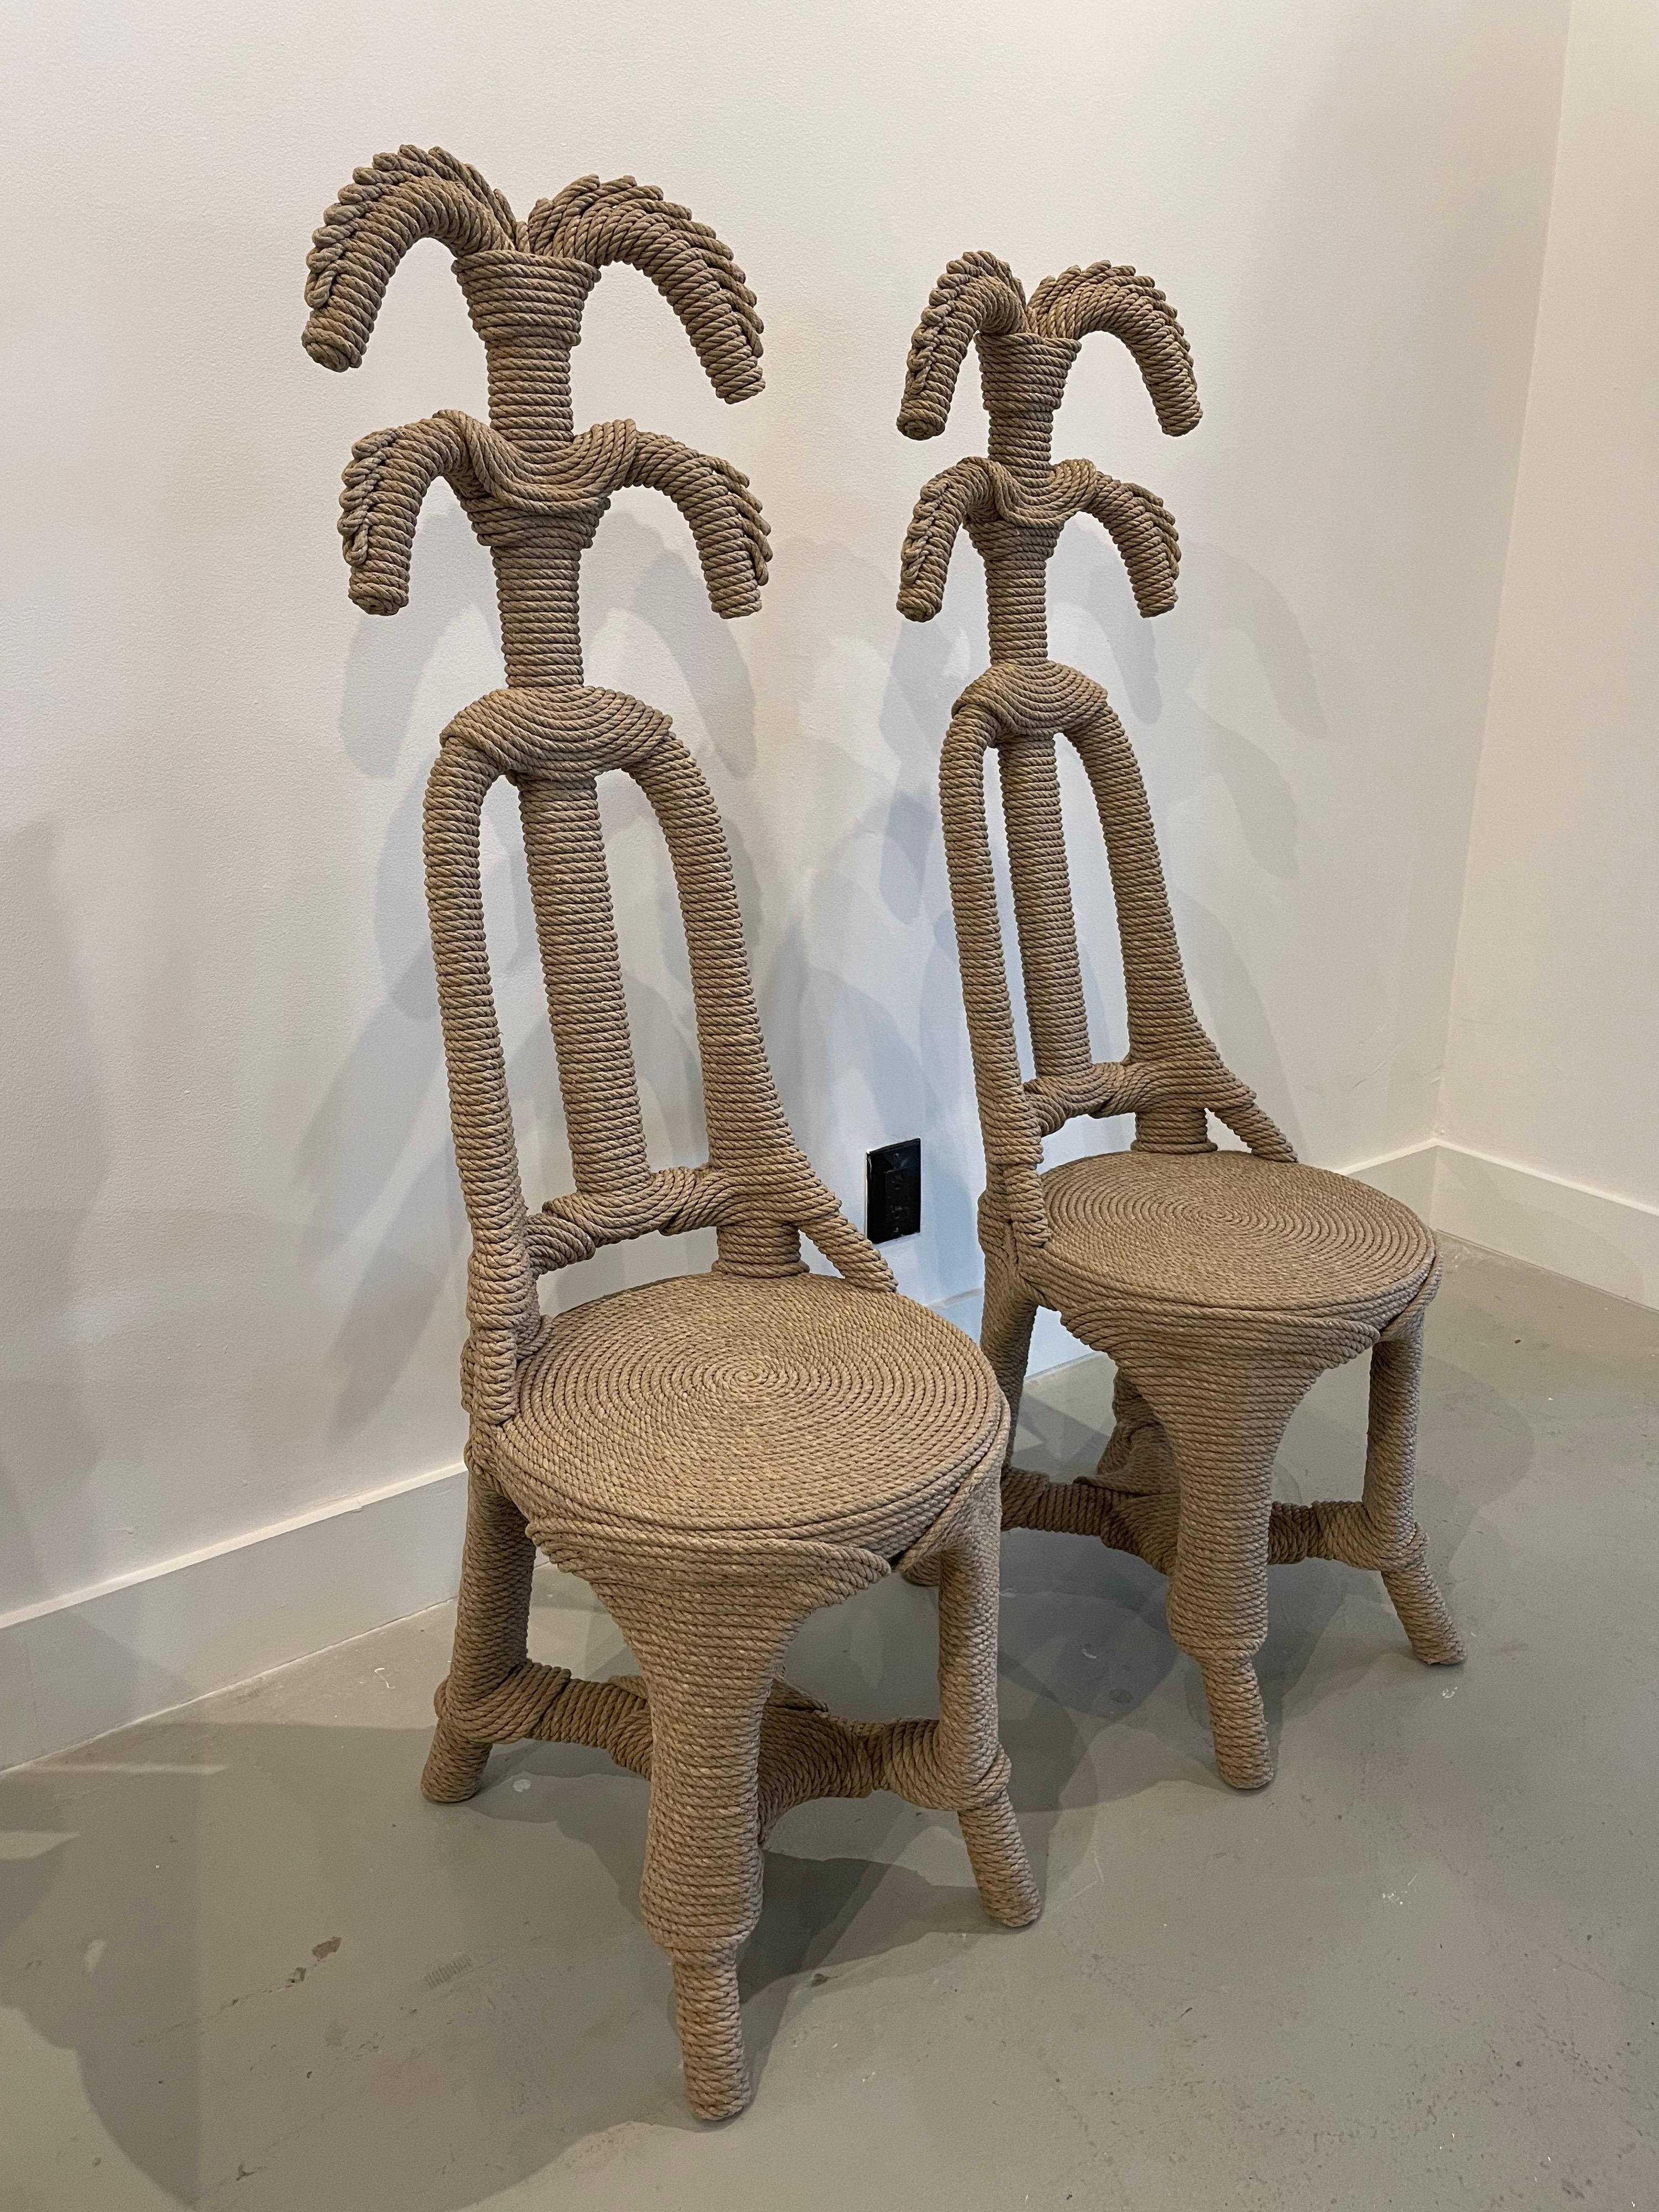 This chair named 